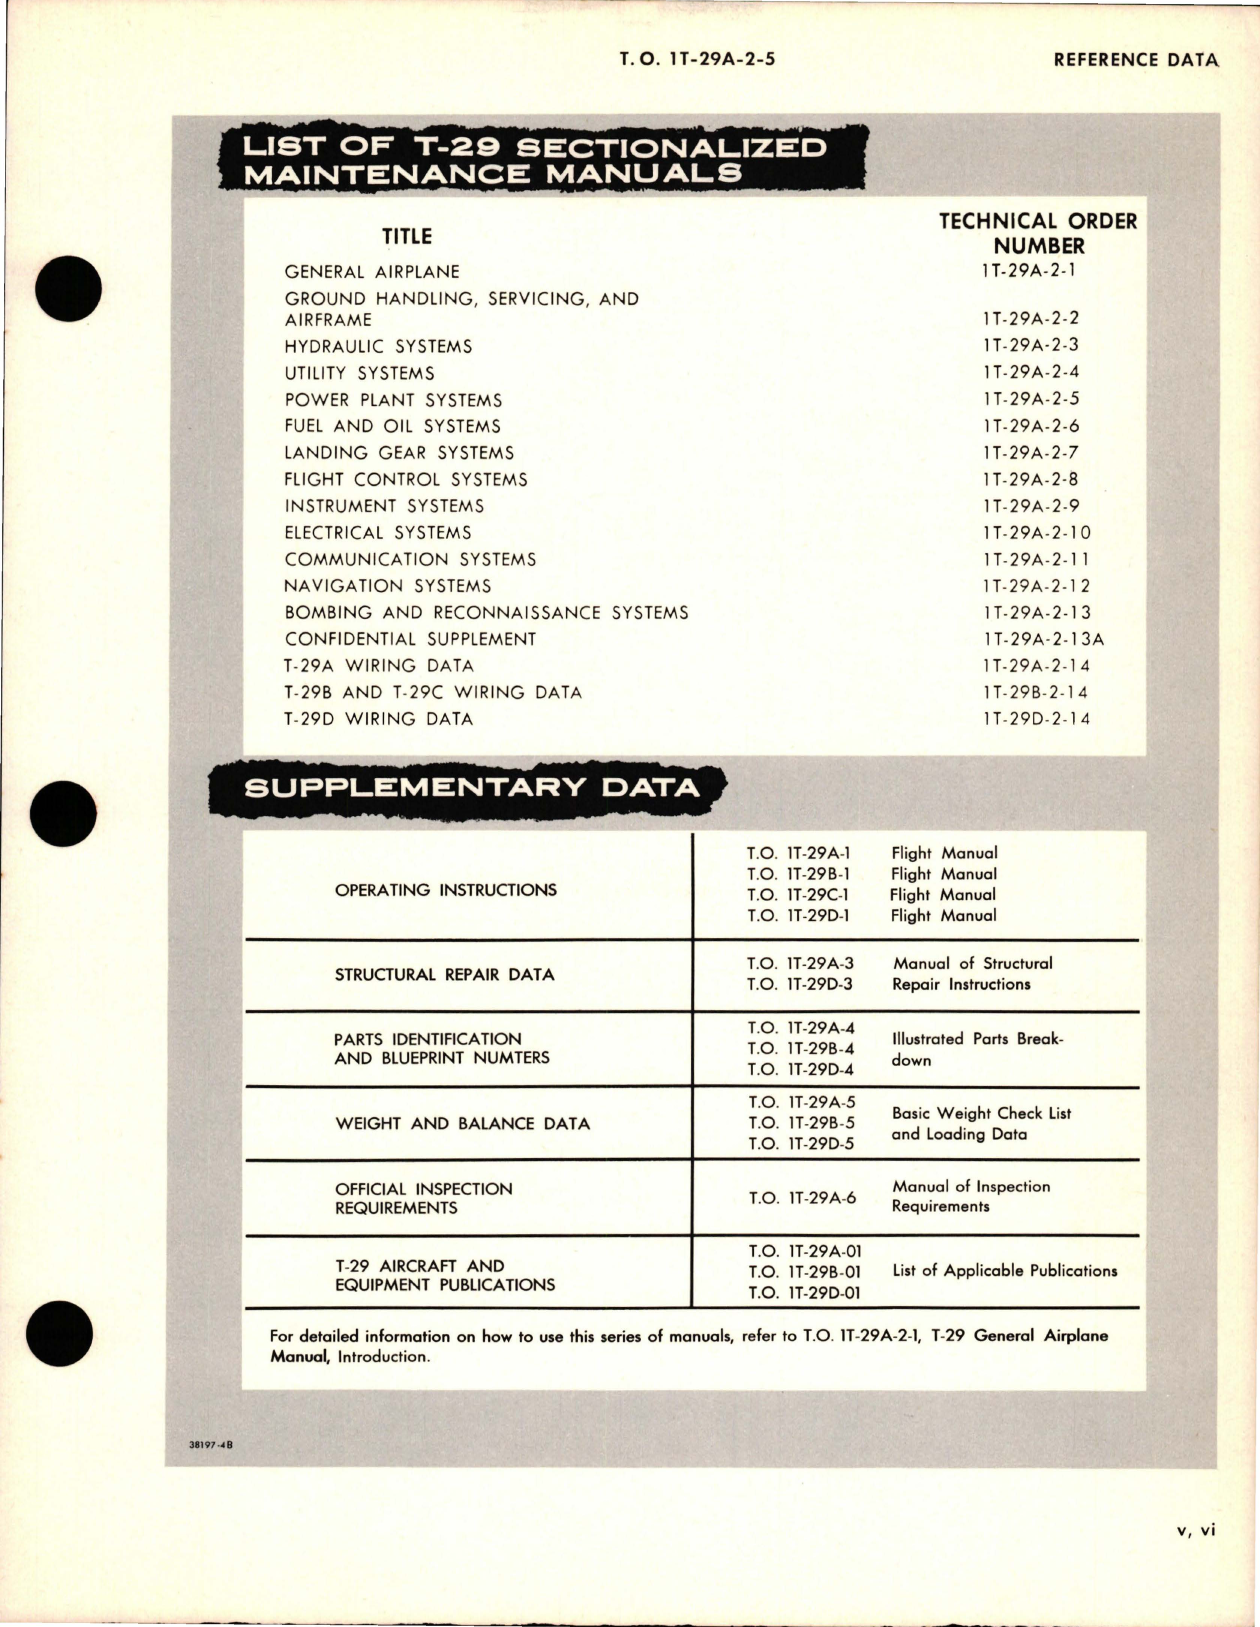 Sample page 7 from AirCorps Library document: Maintenance for Power Plant Systems for T-29A, T-29B, T-29C and T-29D